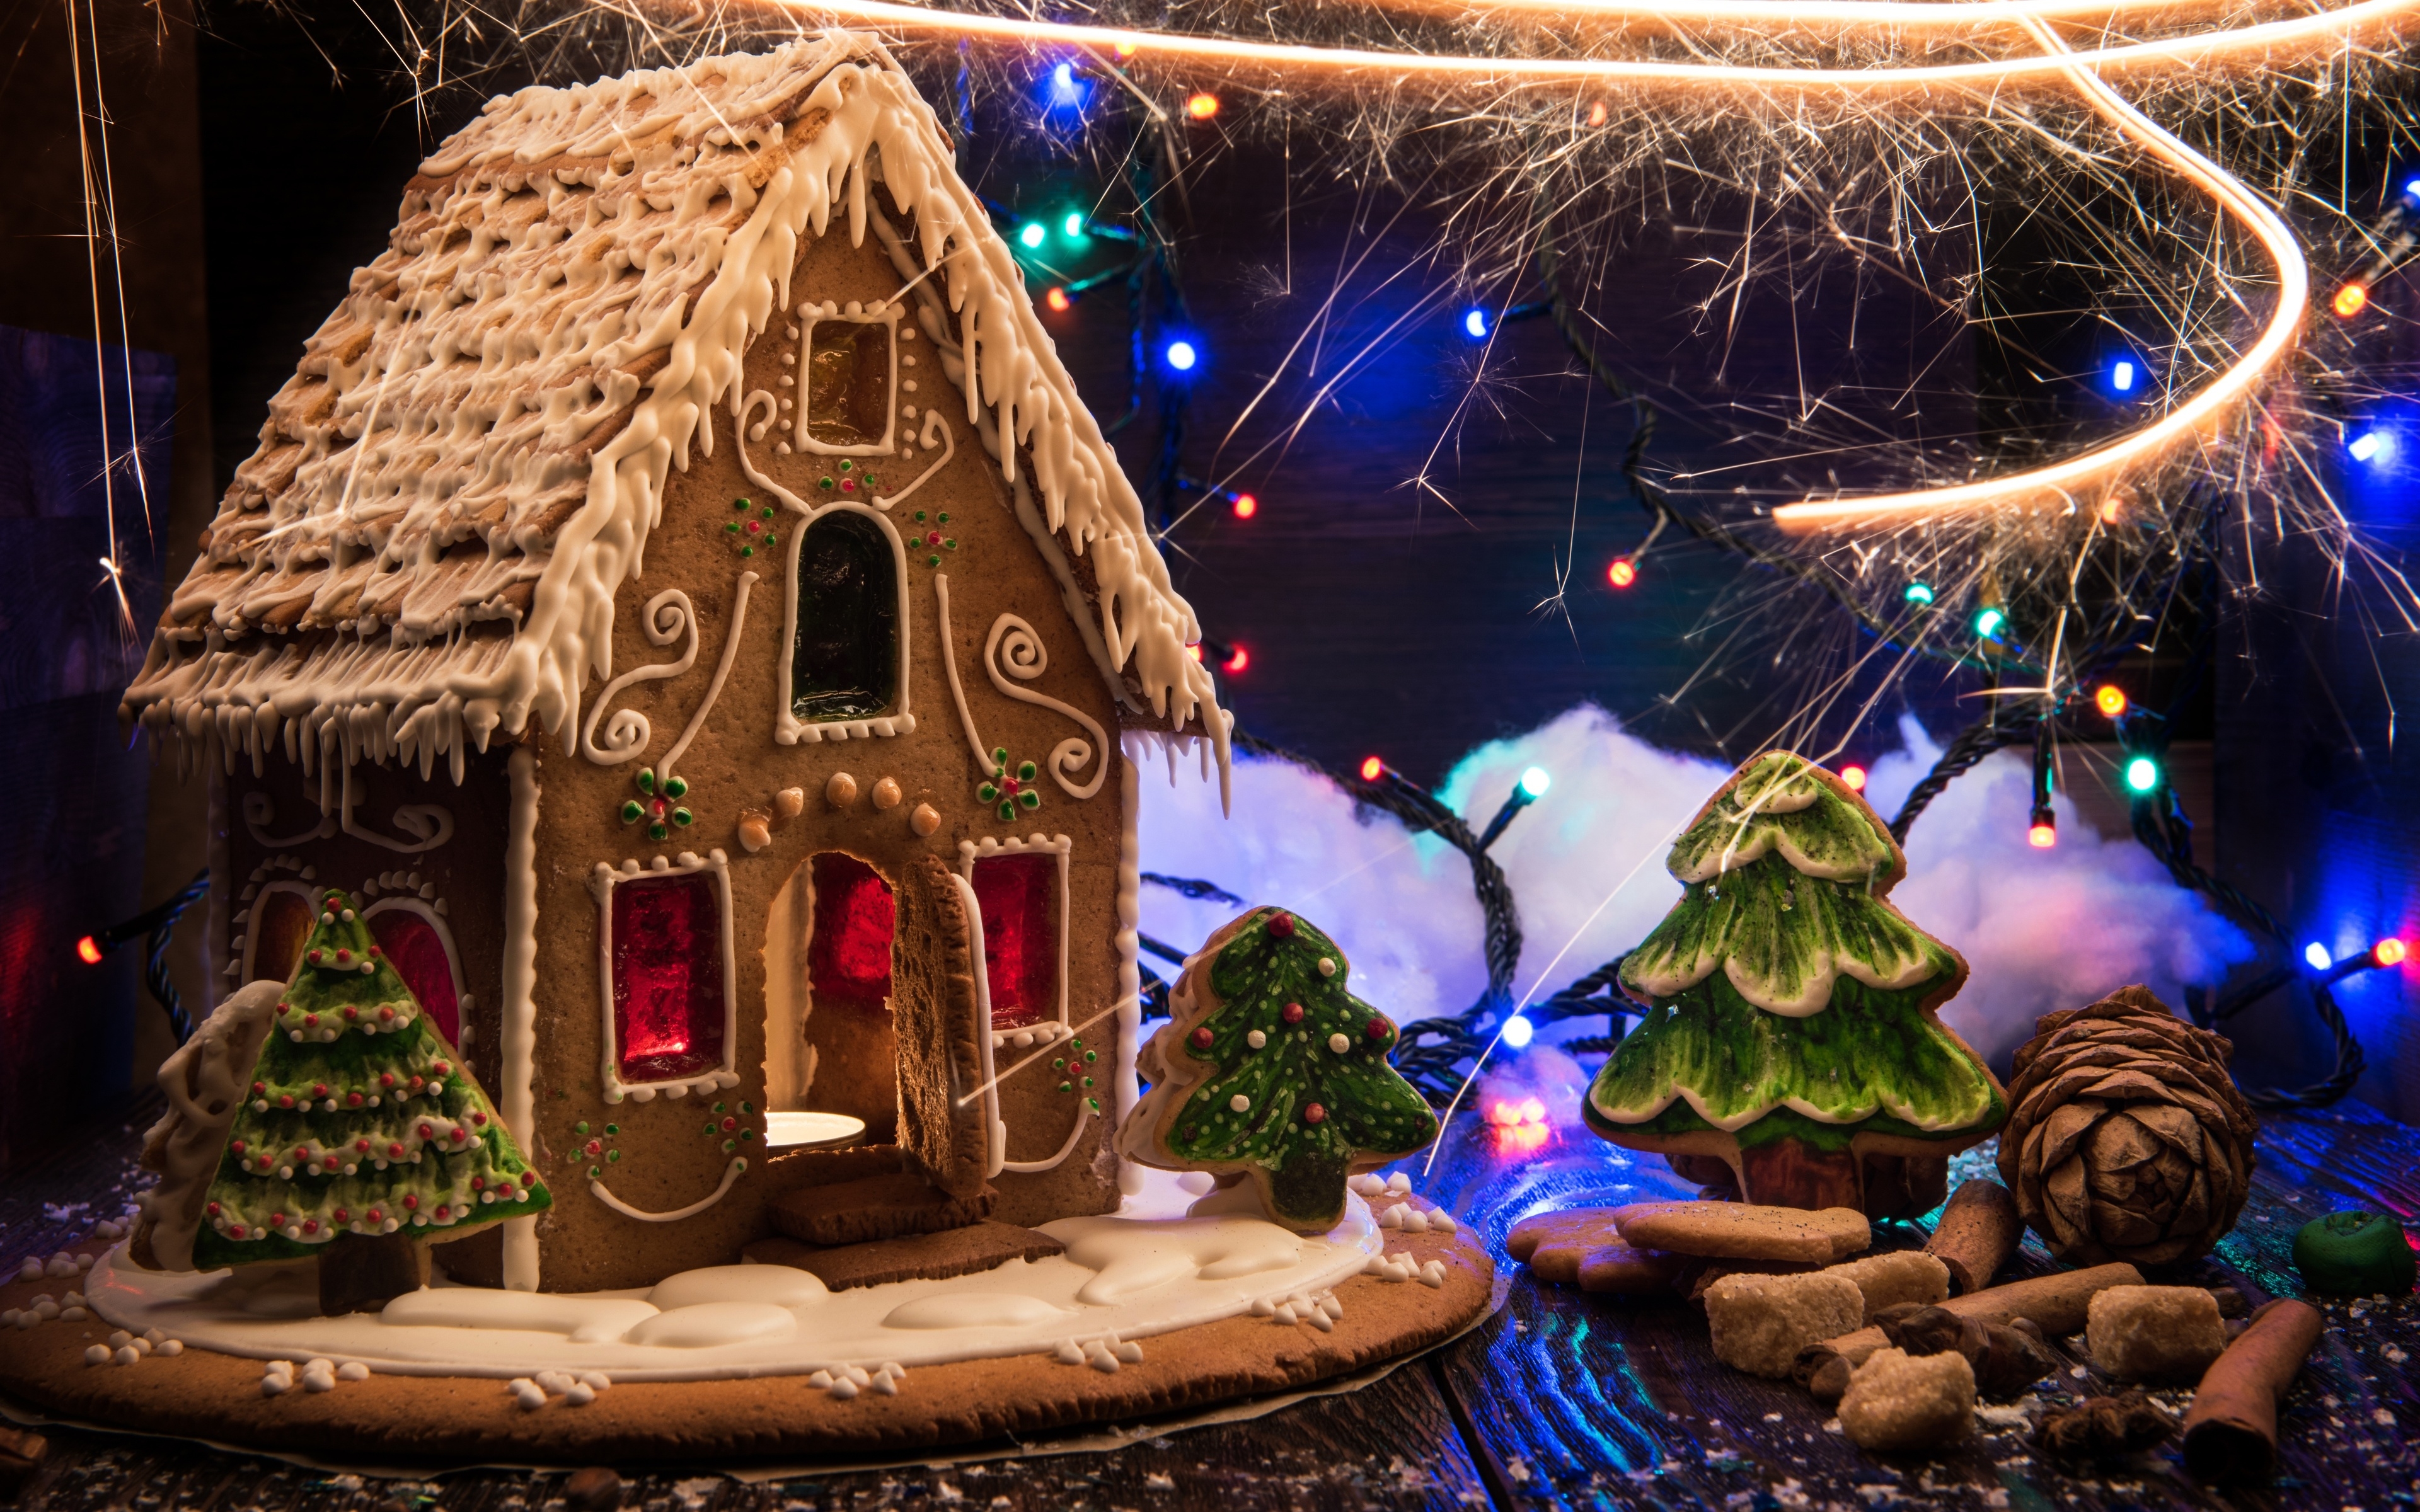 Christmas Gingerbread Decorations for 3840 x 2400 Widescreen resolution